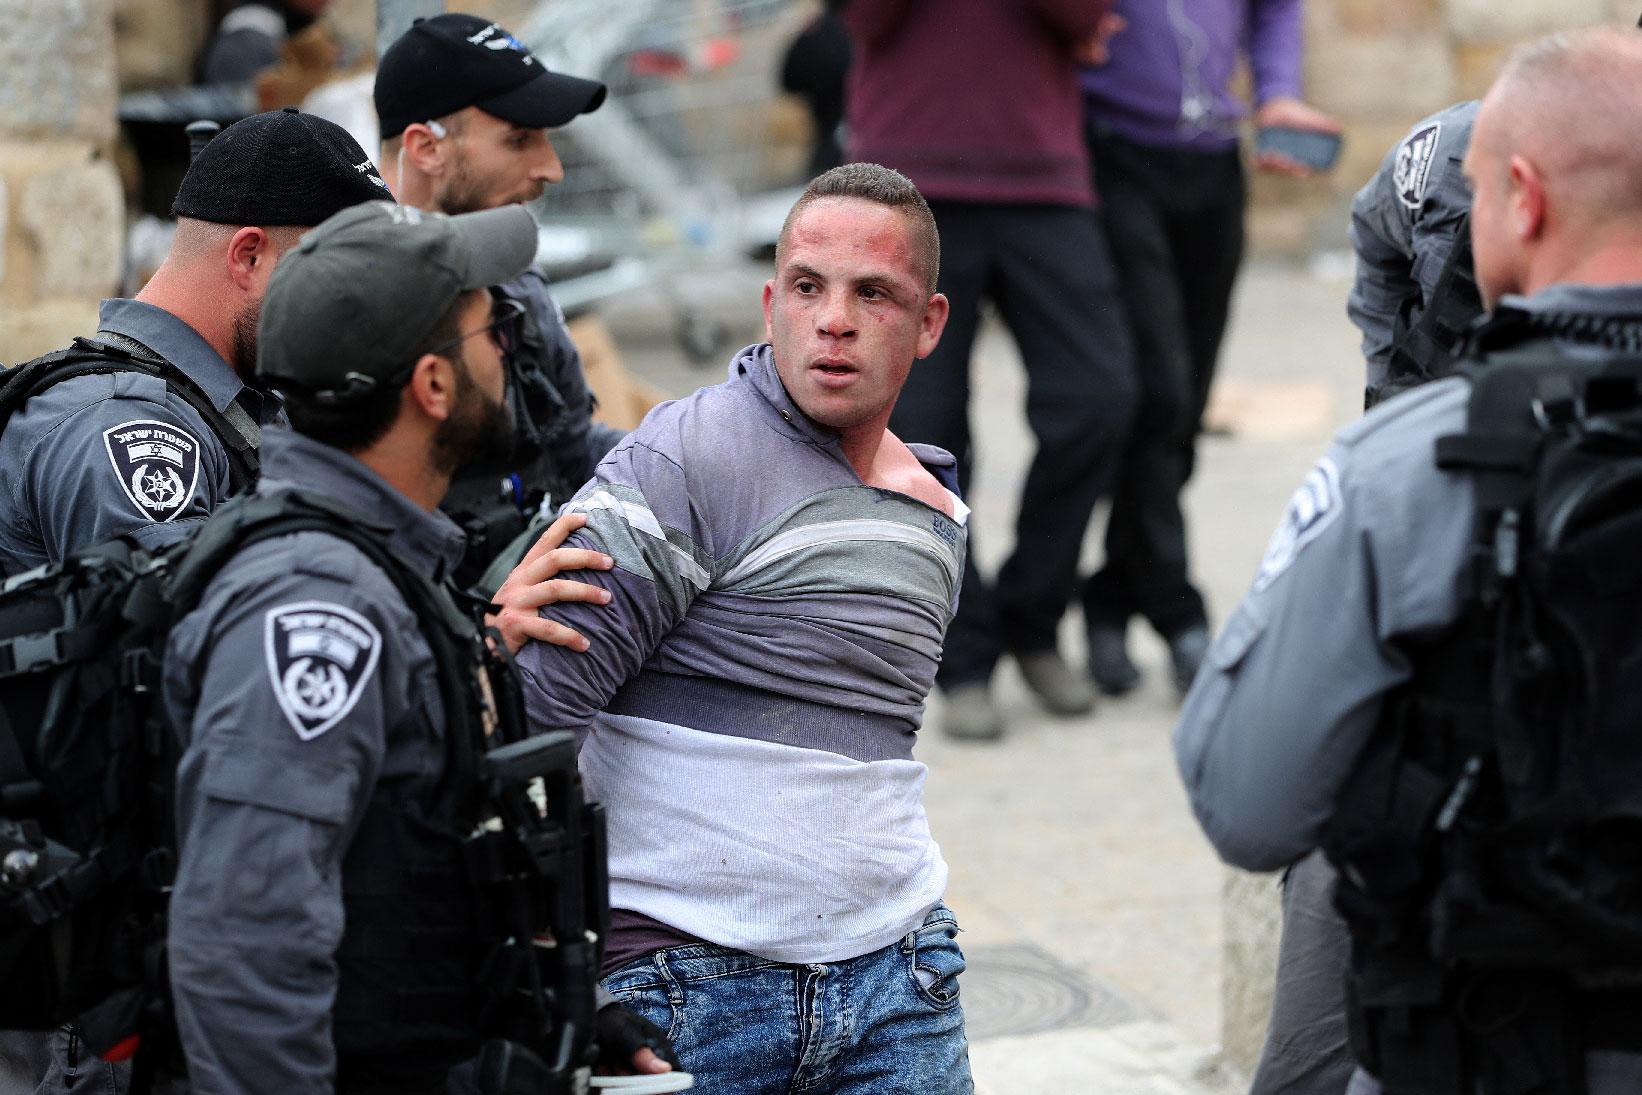 Israeli policemen detain a Palestinian protester during scuffles outside the compound housing al-Aqsa Mosque in occupied East Jerusalem's Old City March 12, 2019.